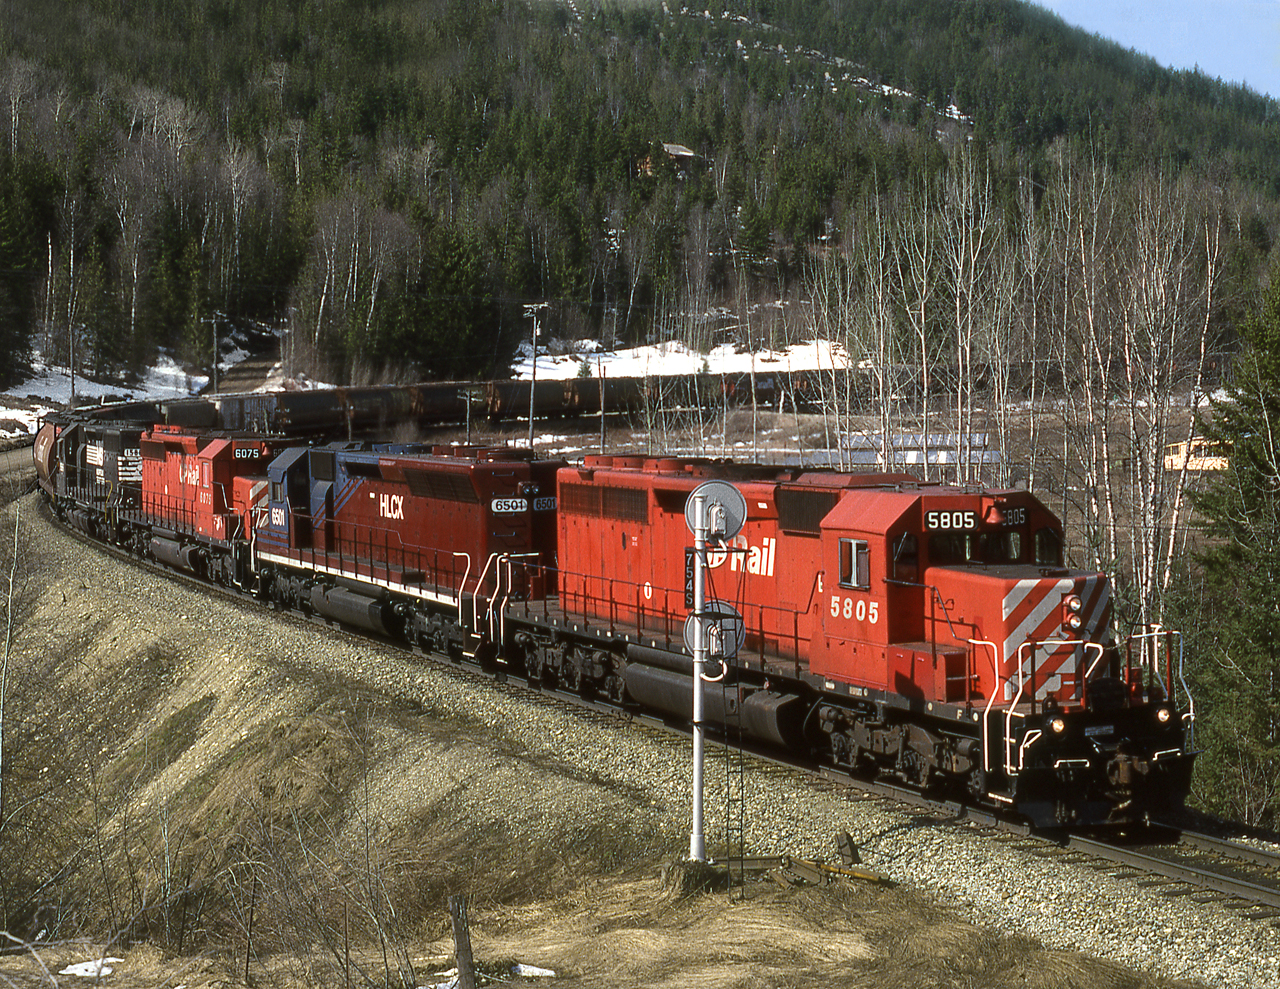 Grain empties approach Carlin siding on the south track from Notch Hill to Tappen on CP's Shuswap Sub. This was original main on a 2% grade. The north track buuilt in 1970's eased the grade to under 1% via a massive loop and is used for loaded westbound trains.